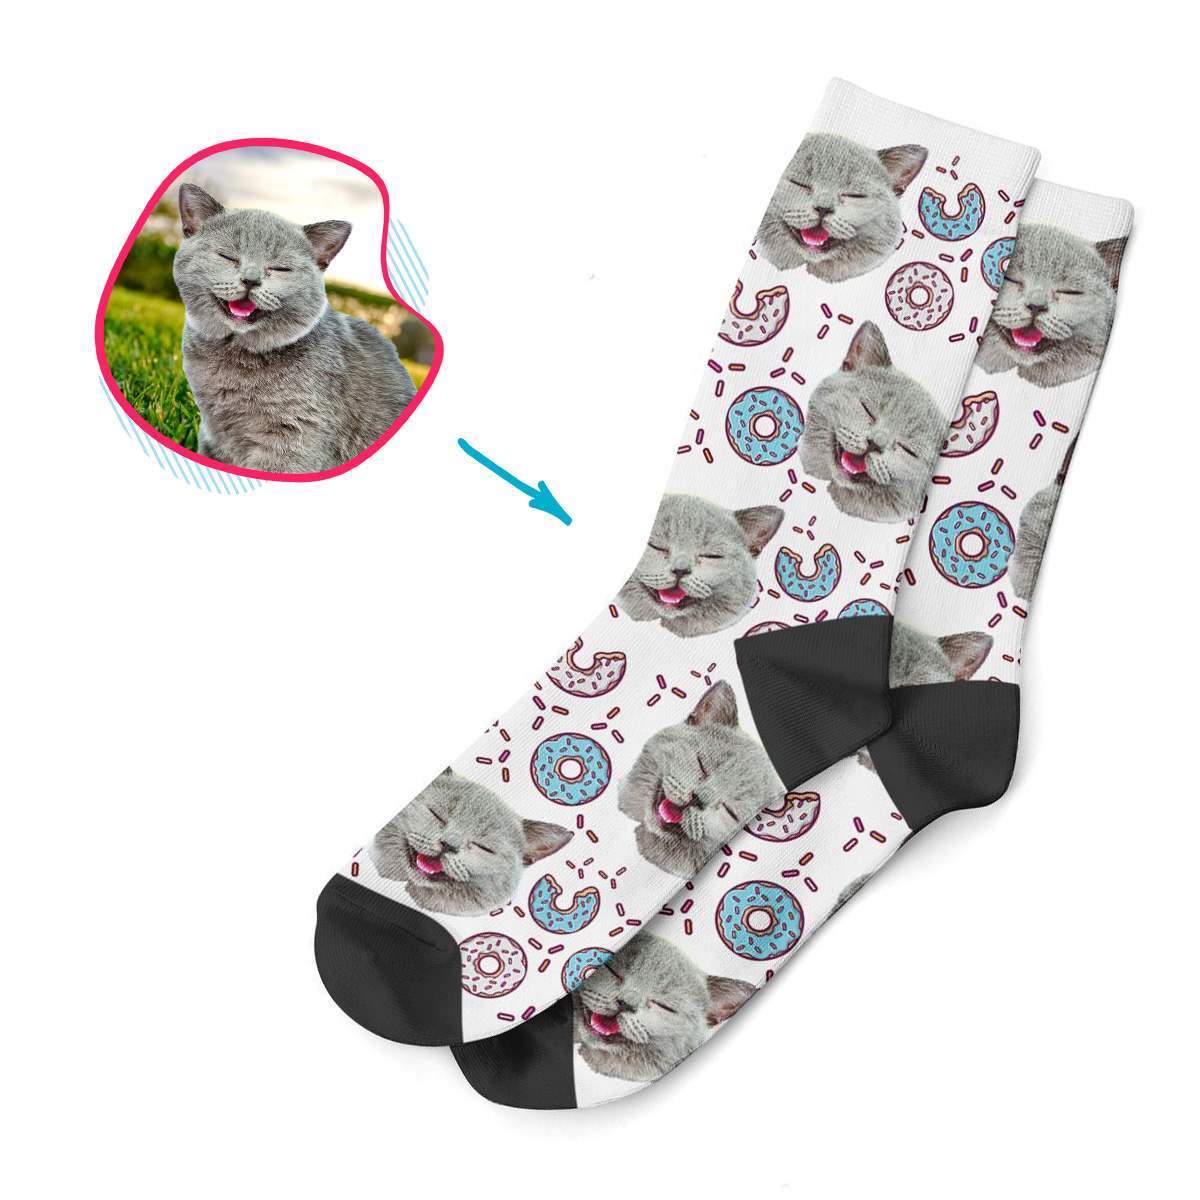 white Donuts socks personalized with photo of face printed on them